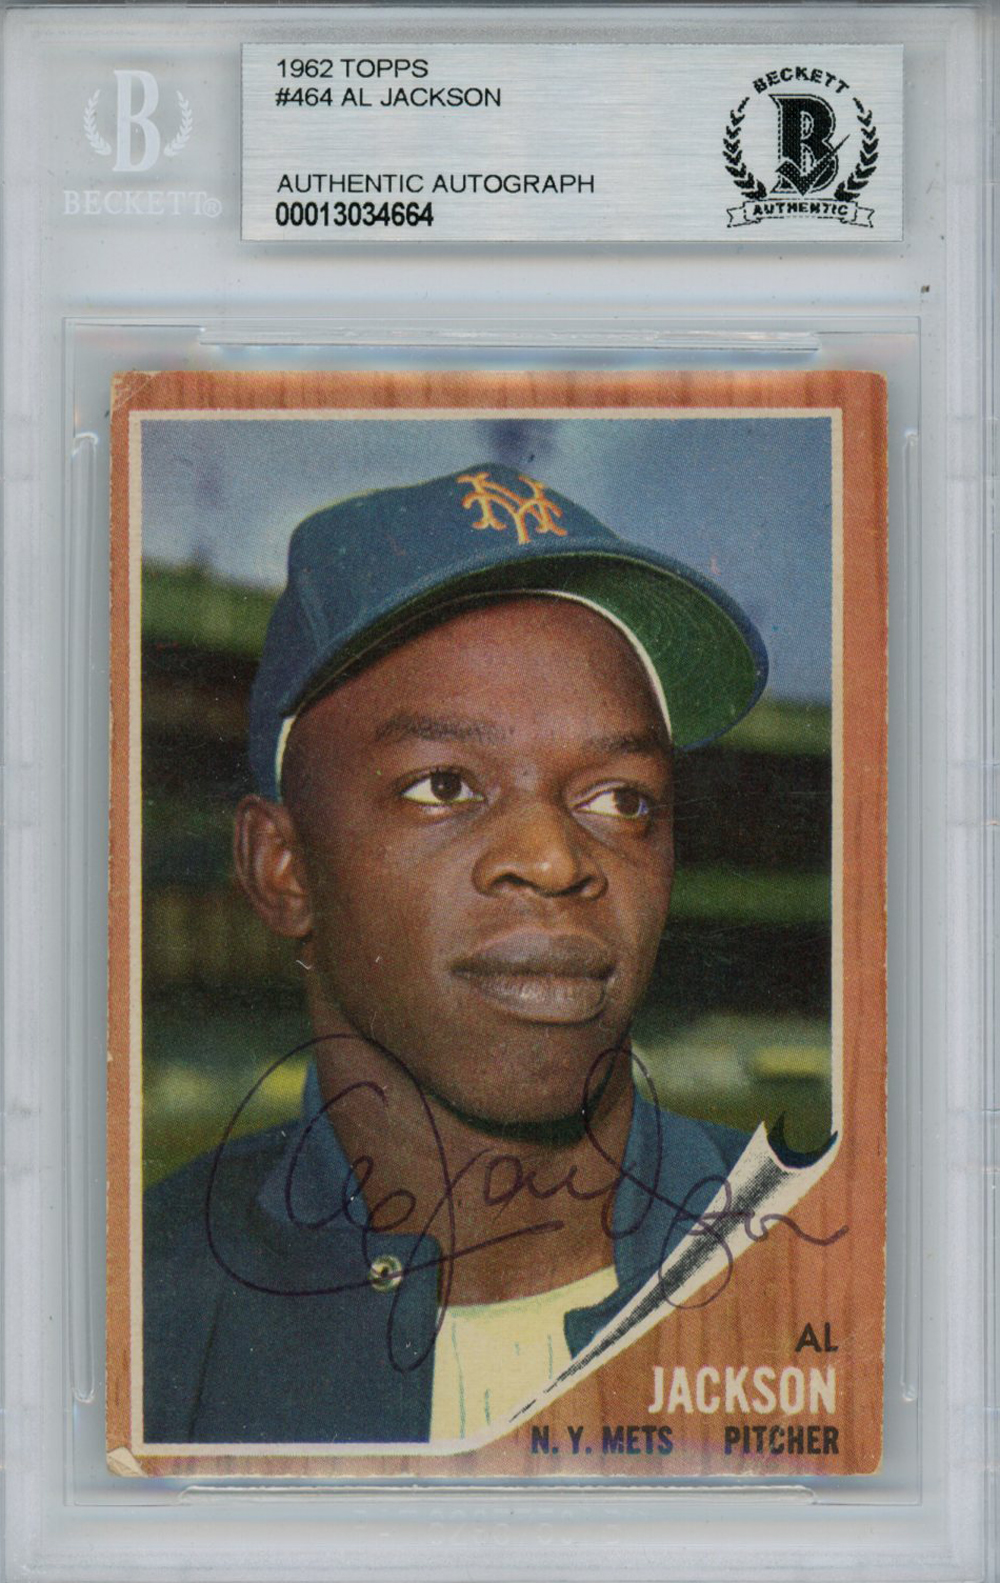 Al Jackson Autographed/Signed 1962 Topps #464 Trading Card Beckett Slab